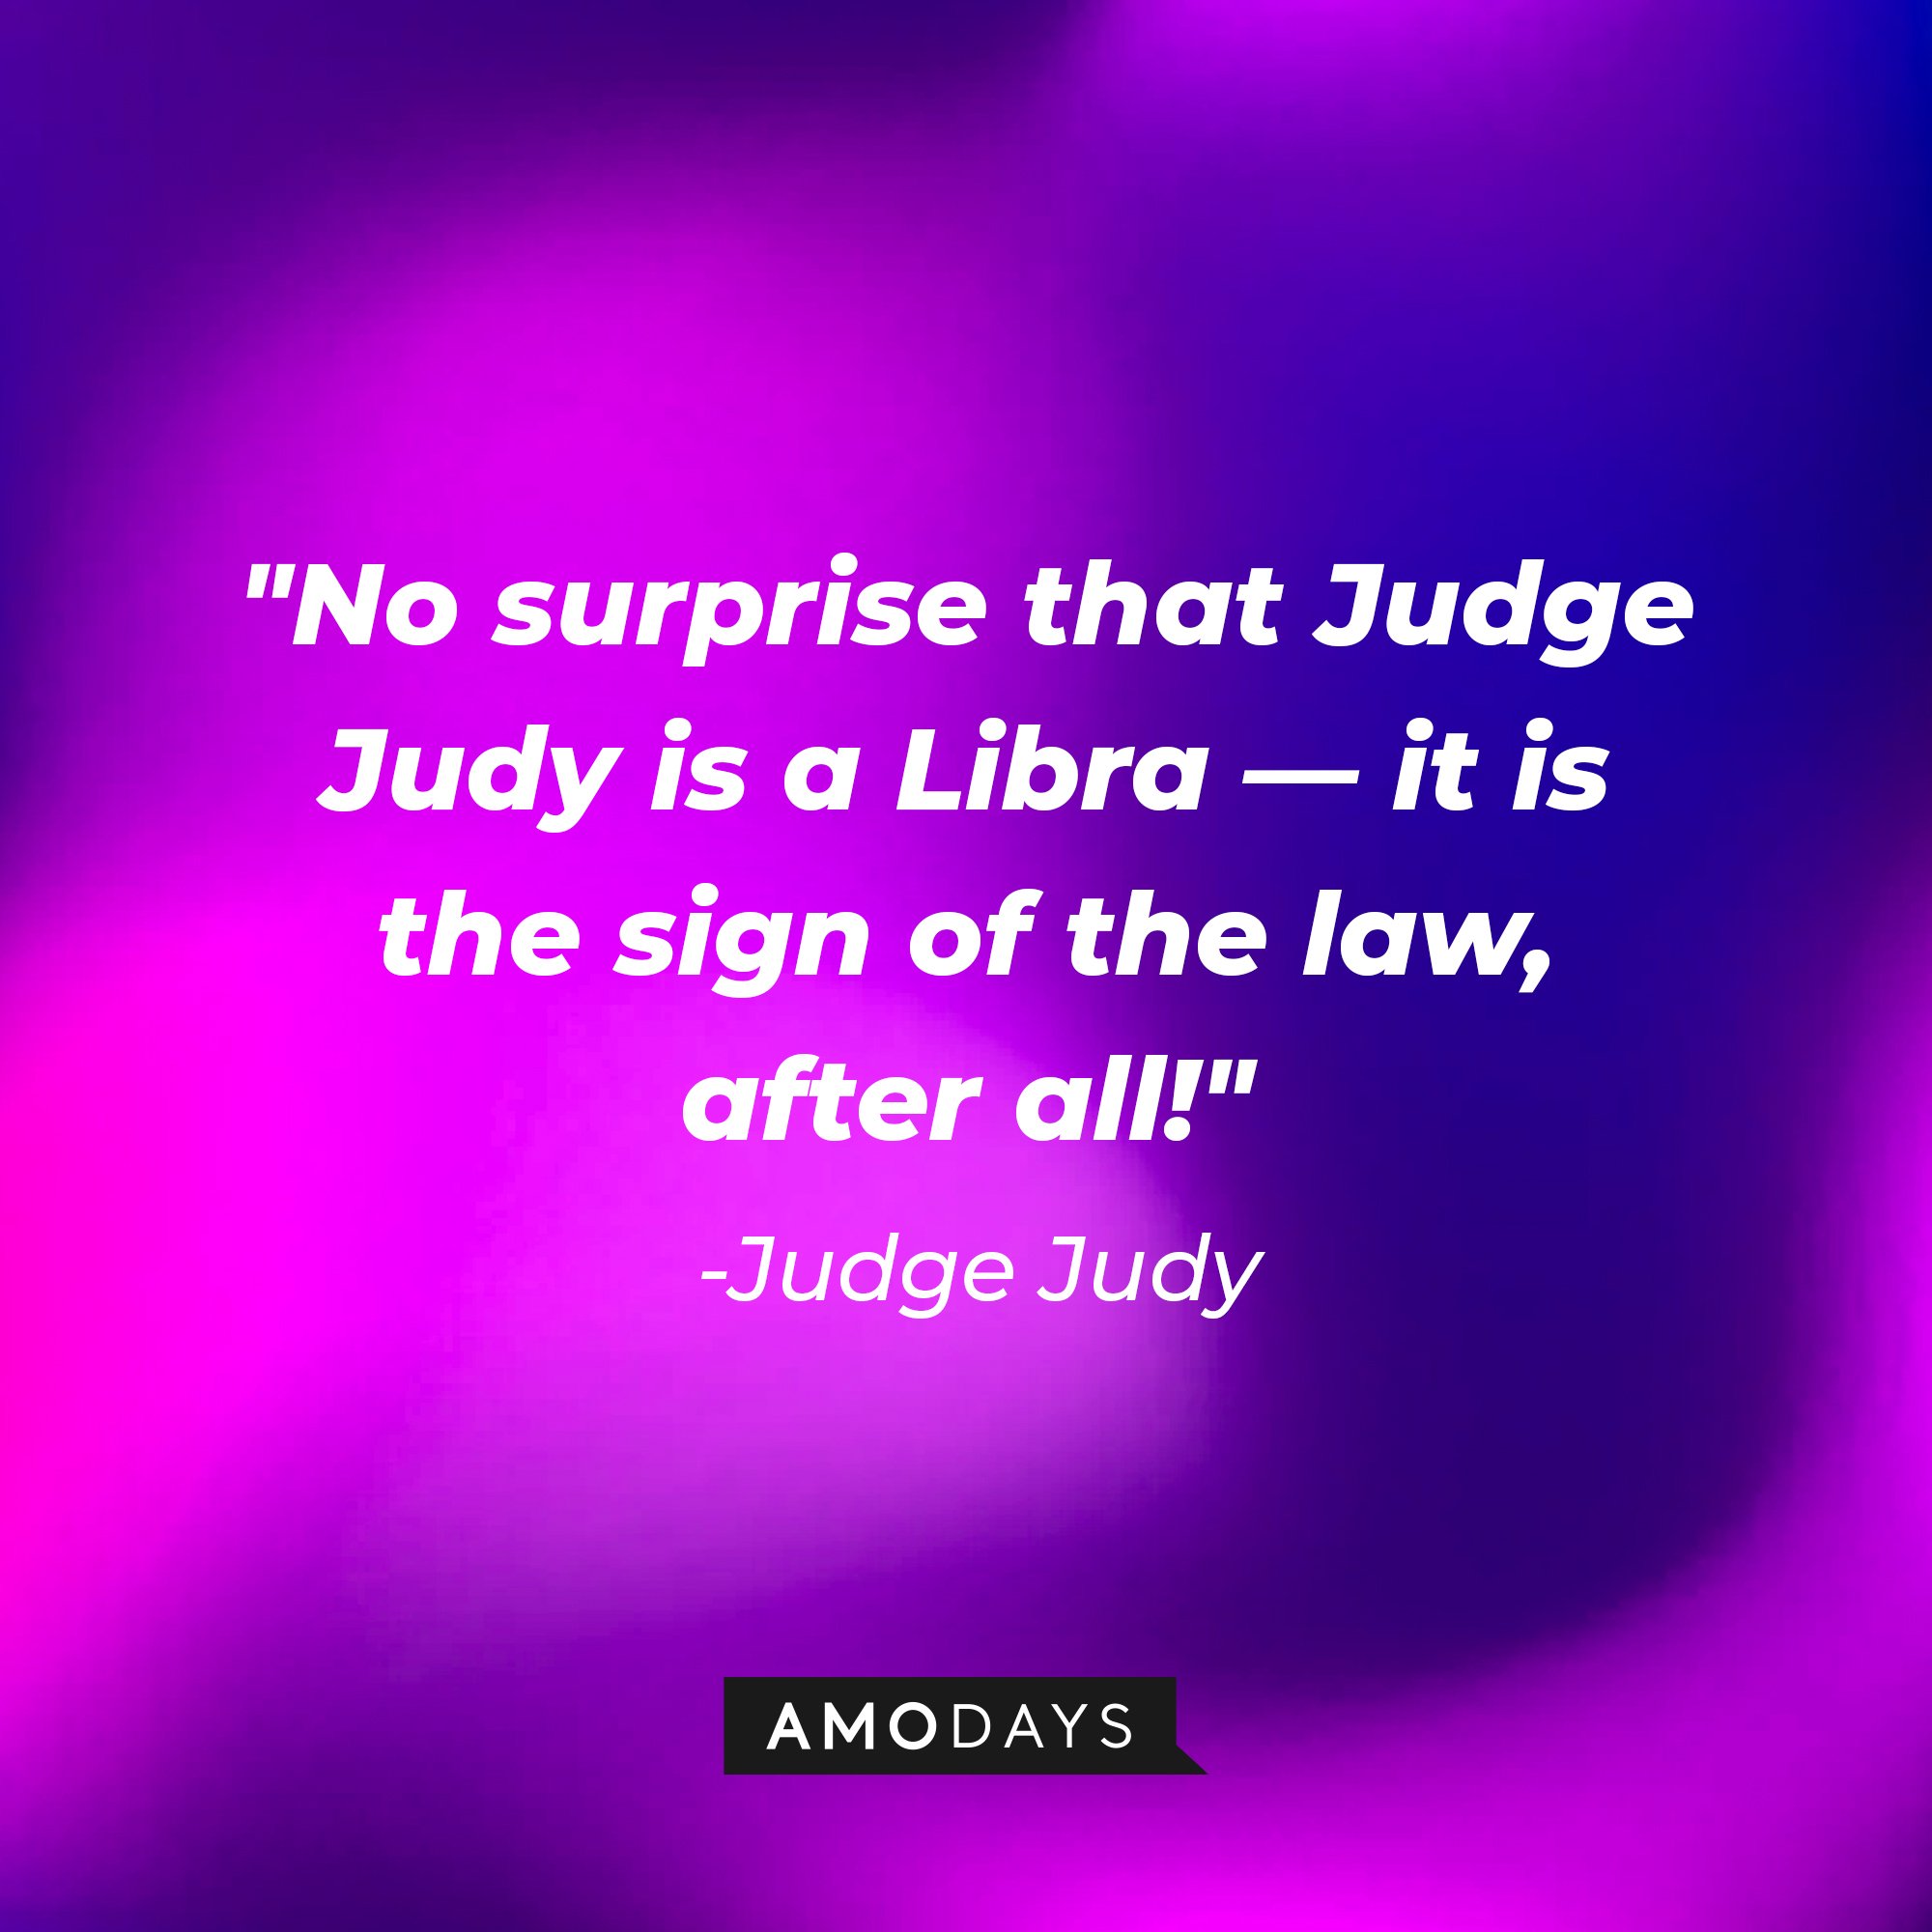 Judge Judy's quote: "No surprise that Judge Judy is a Libra—it is the sign of the law, after all!" | Image: AmoDays